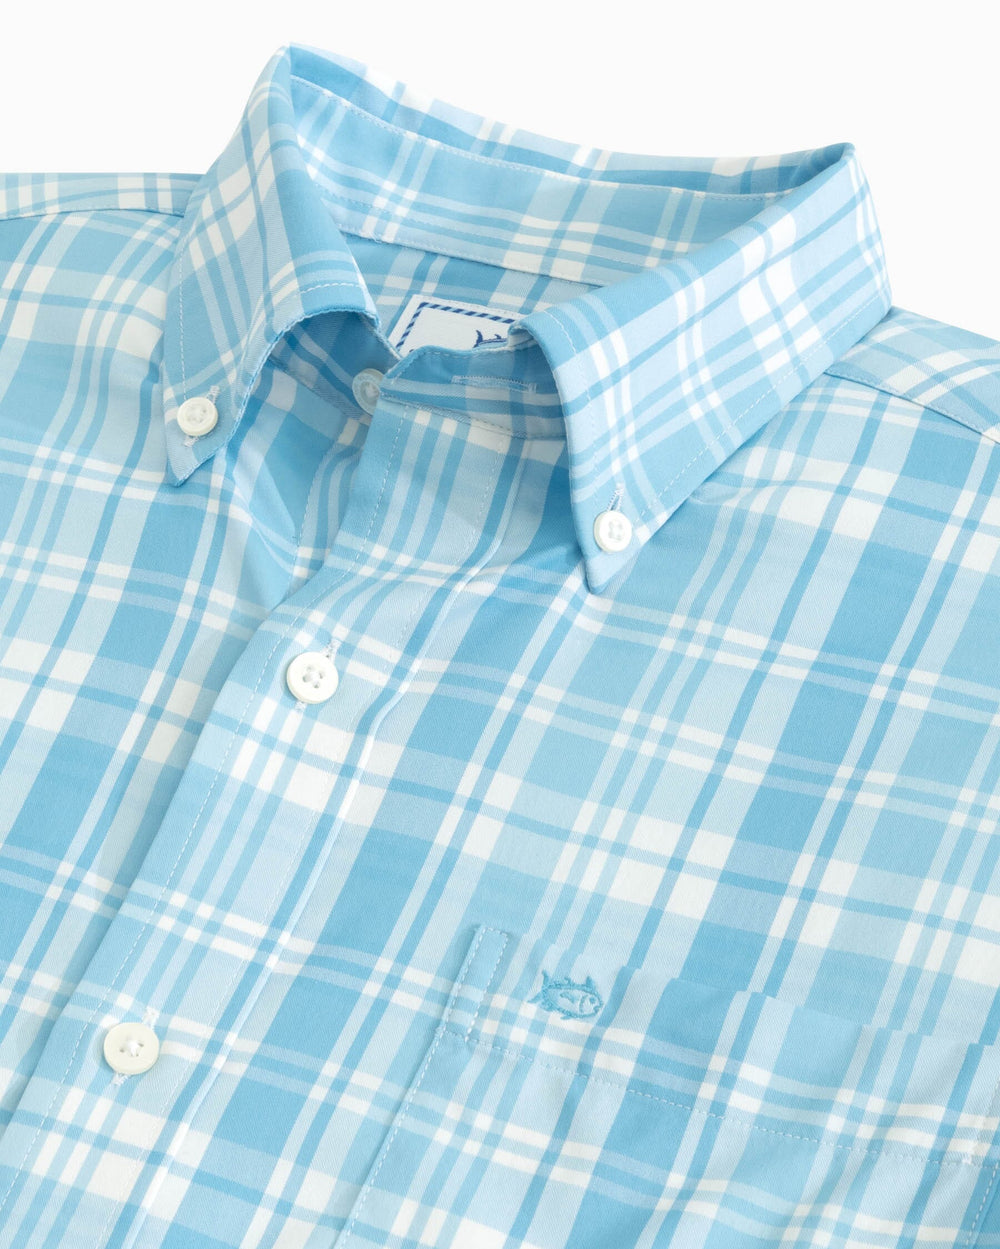 The detail view of the Southern Tide Palm Cayon Plaid Intercoastal Sport Shirts by Southern Tide - Rain Water